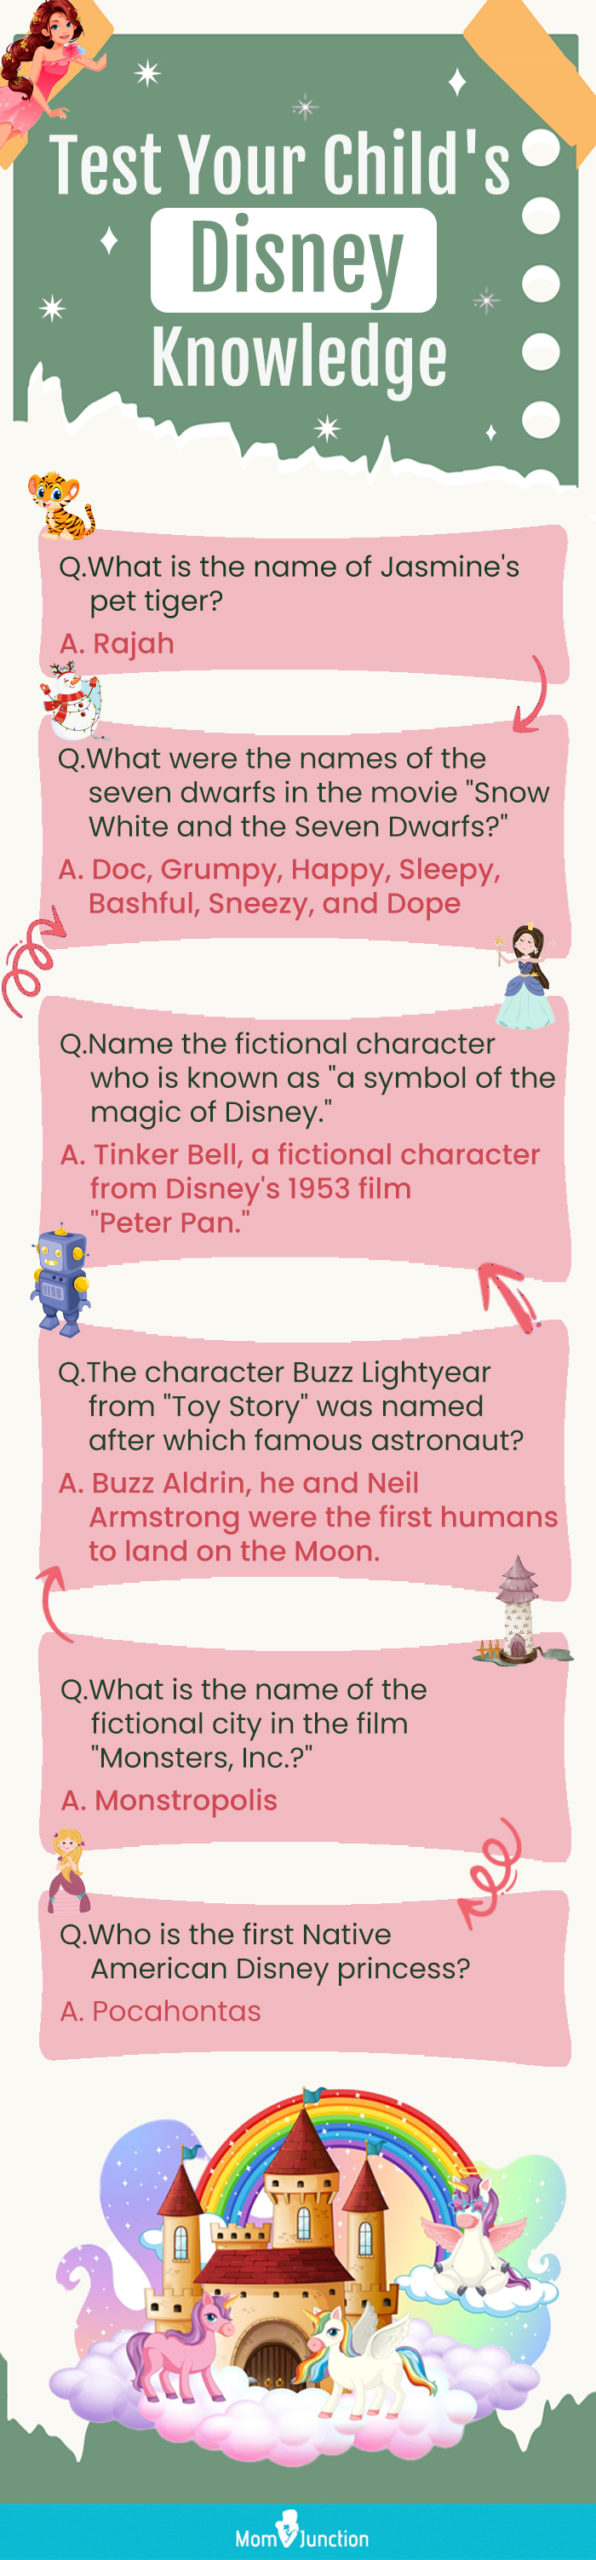 test your childs disney knowledge (infographic)